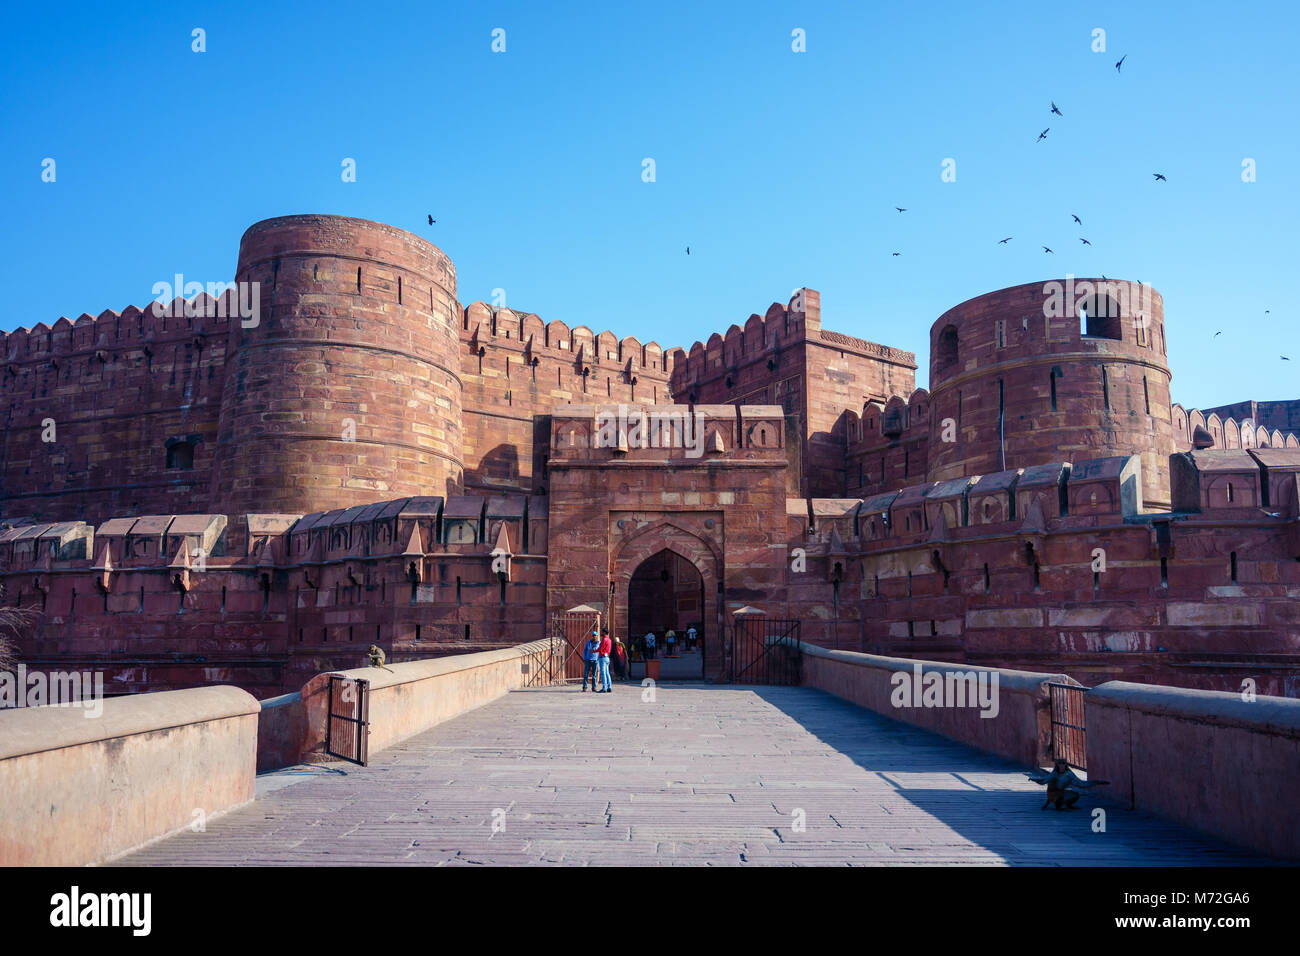 Lahore or Amar Singh Gate of Agra Fort in India Stock Photo